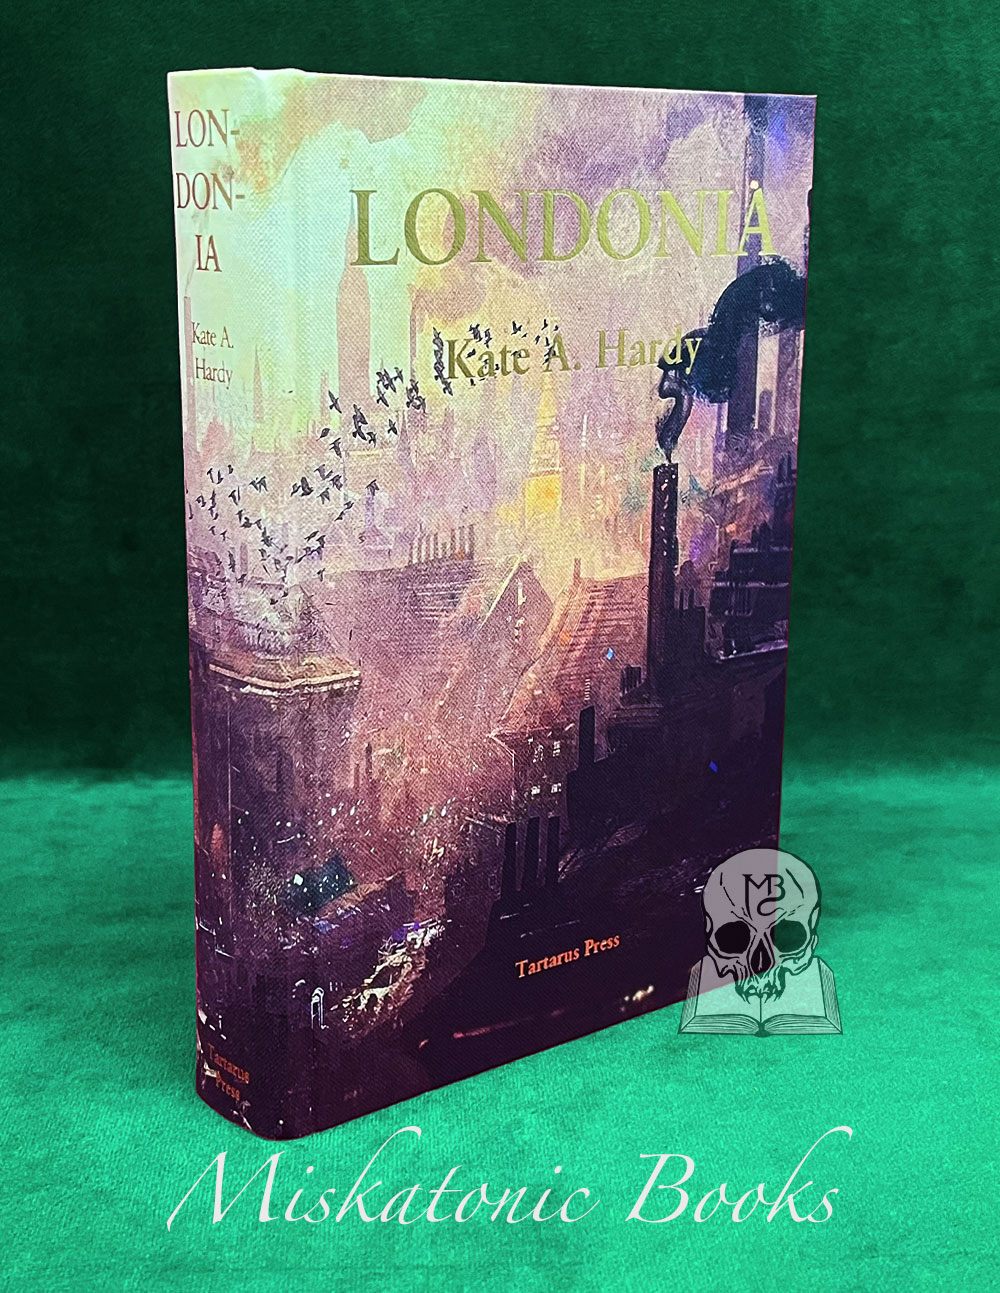 LONDONIA by Kate A. Hardy - First Edition Hardcover Limited to 400 Copies